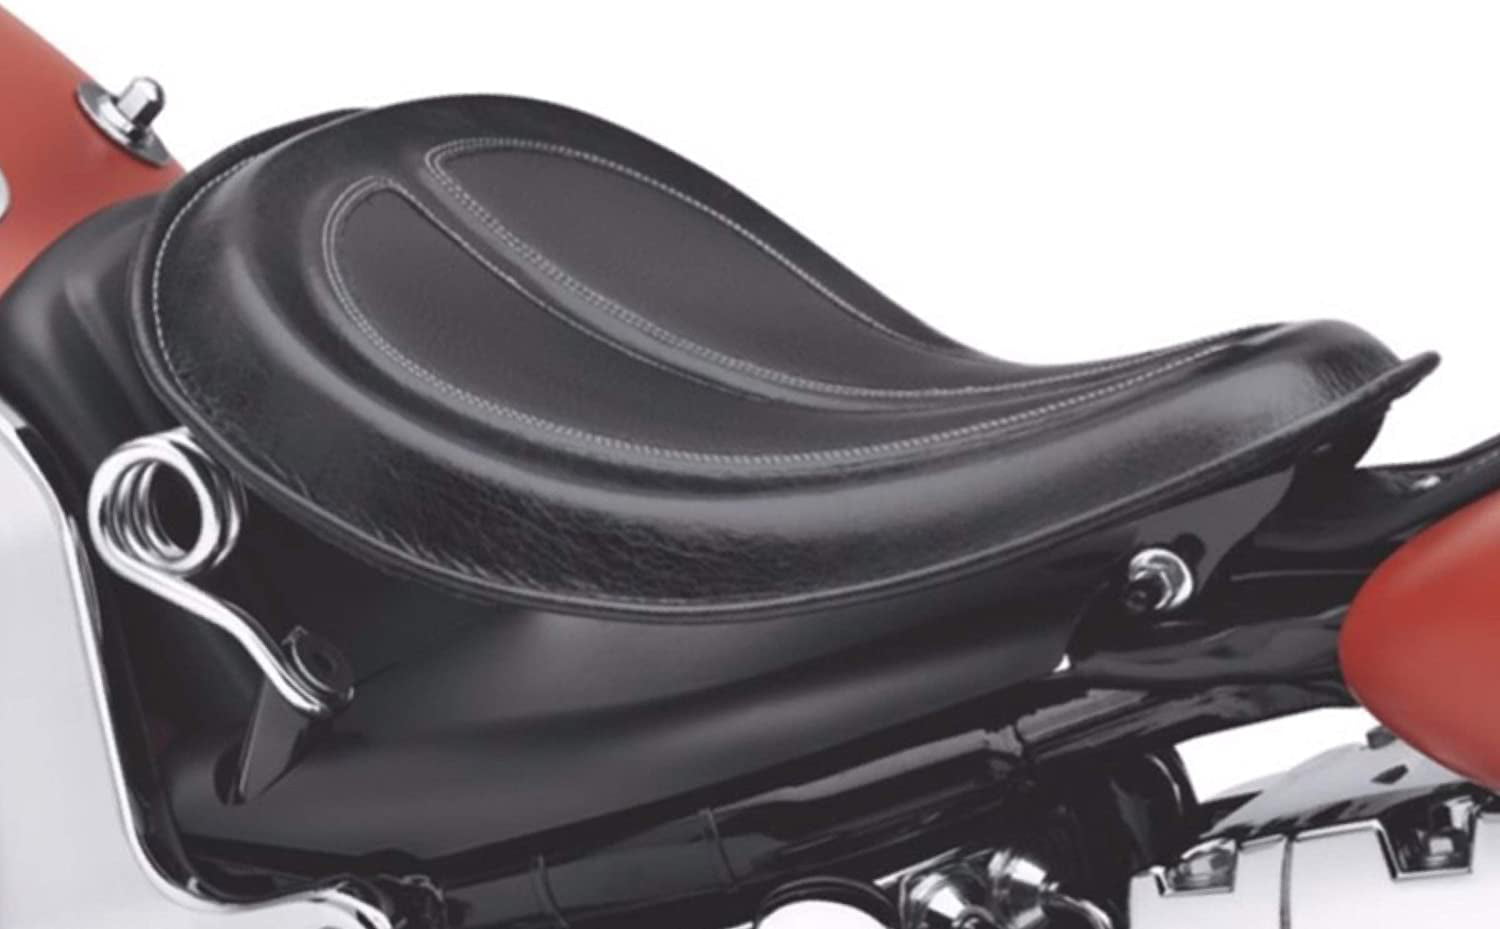 Genuine Leather Black Diamond SOLO Spring Seat HARLEY DAVIDSON Softail Deluxe Slim Heritage Dyna Street Fat Bob Low Rider Wide Glide Sportster XL883 XL1200 Iron Low Roadster BOBBER Ref Saddle 52000276 